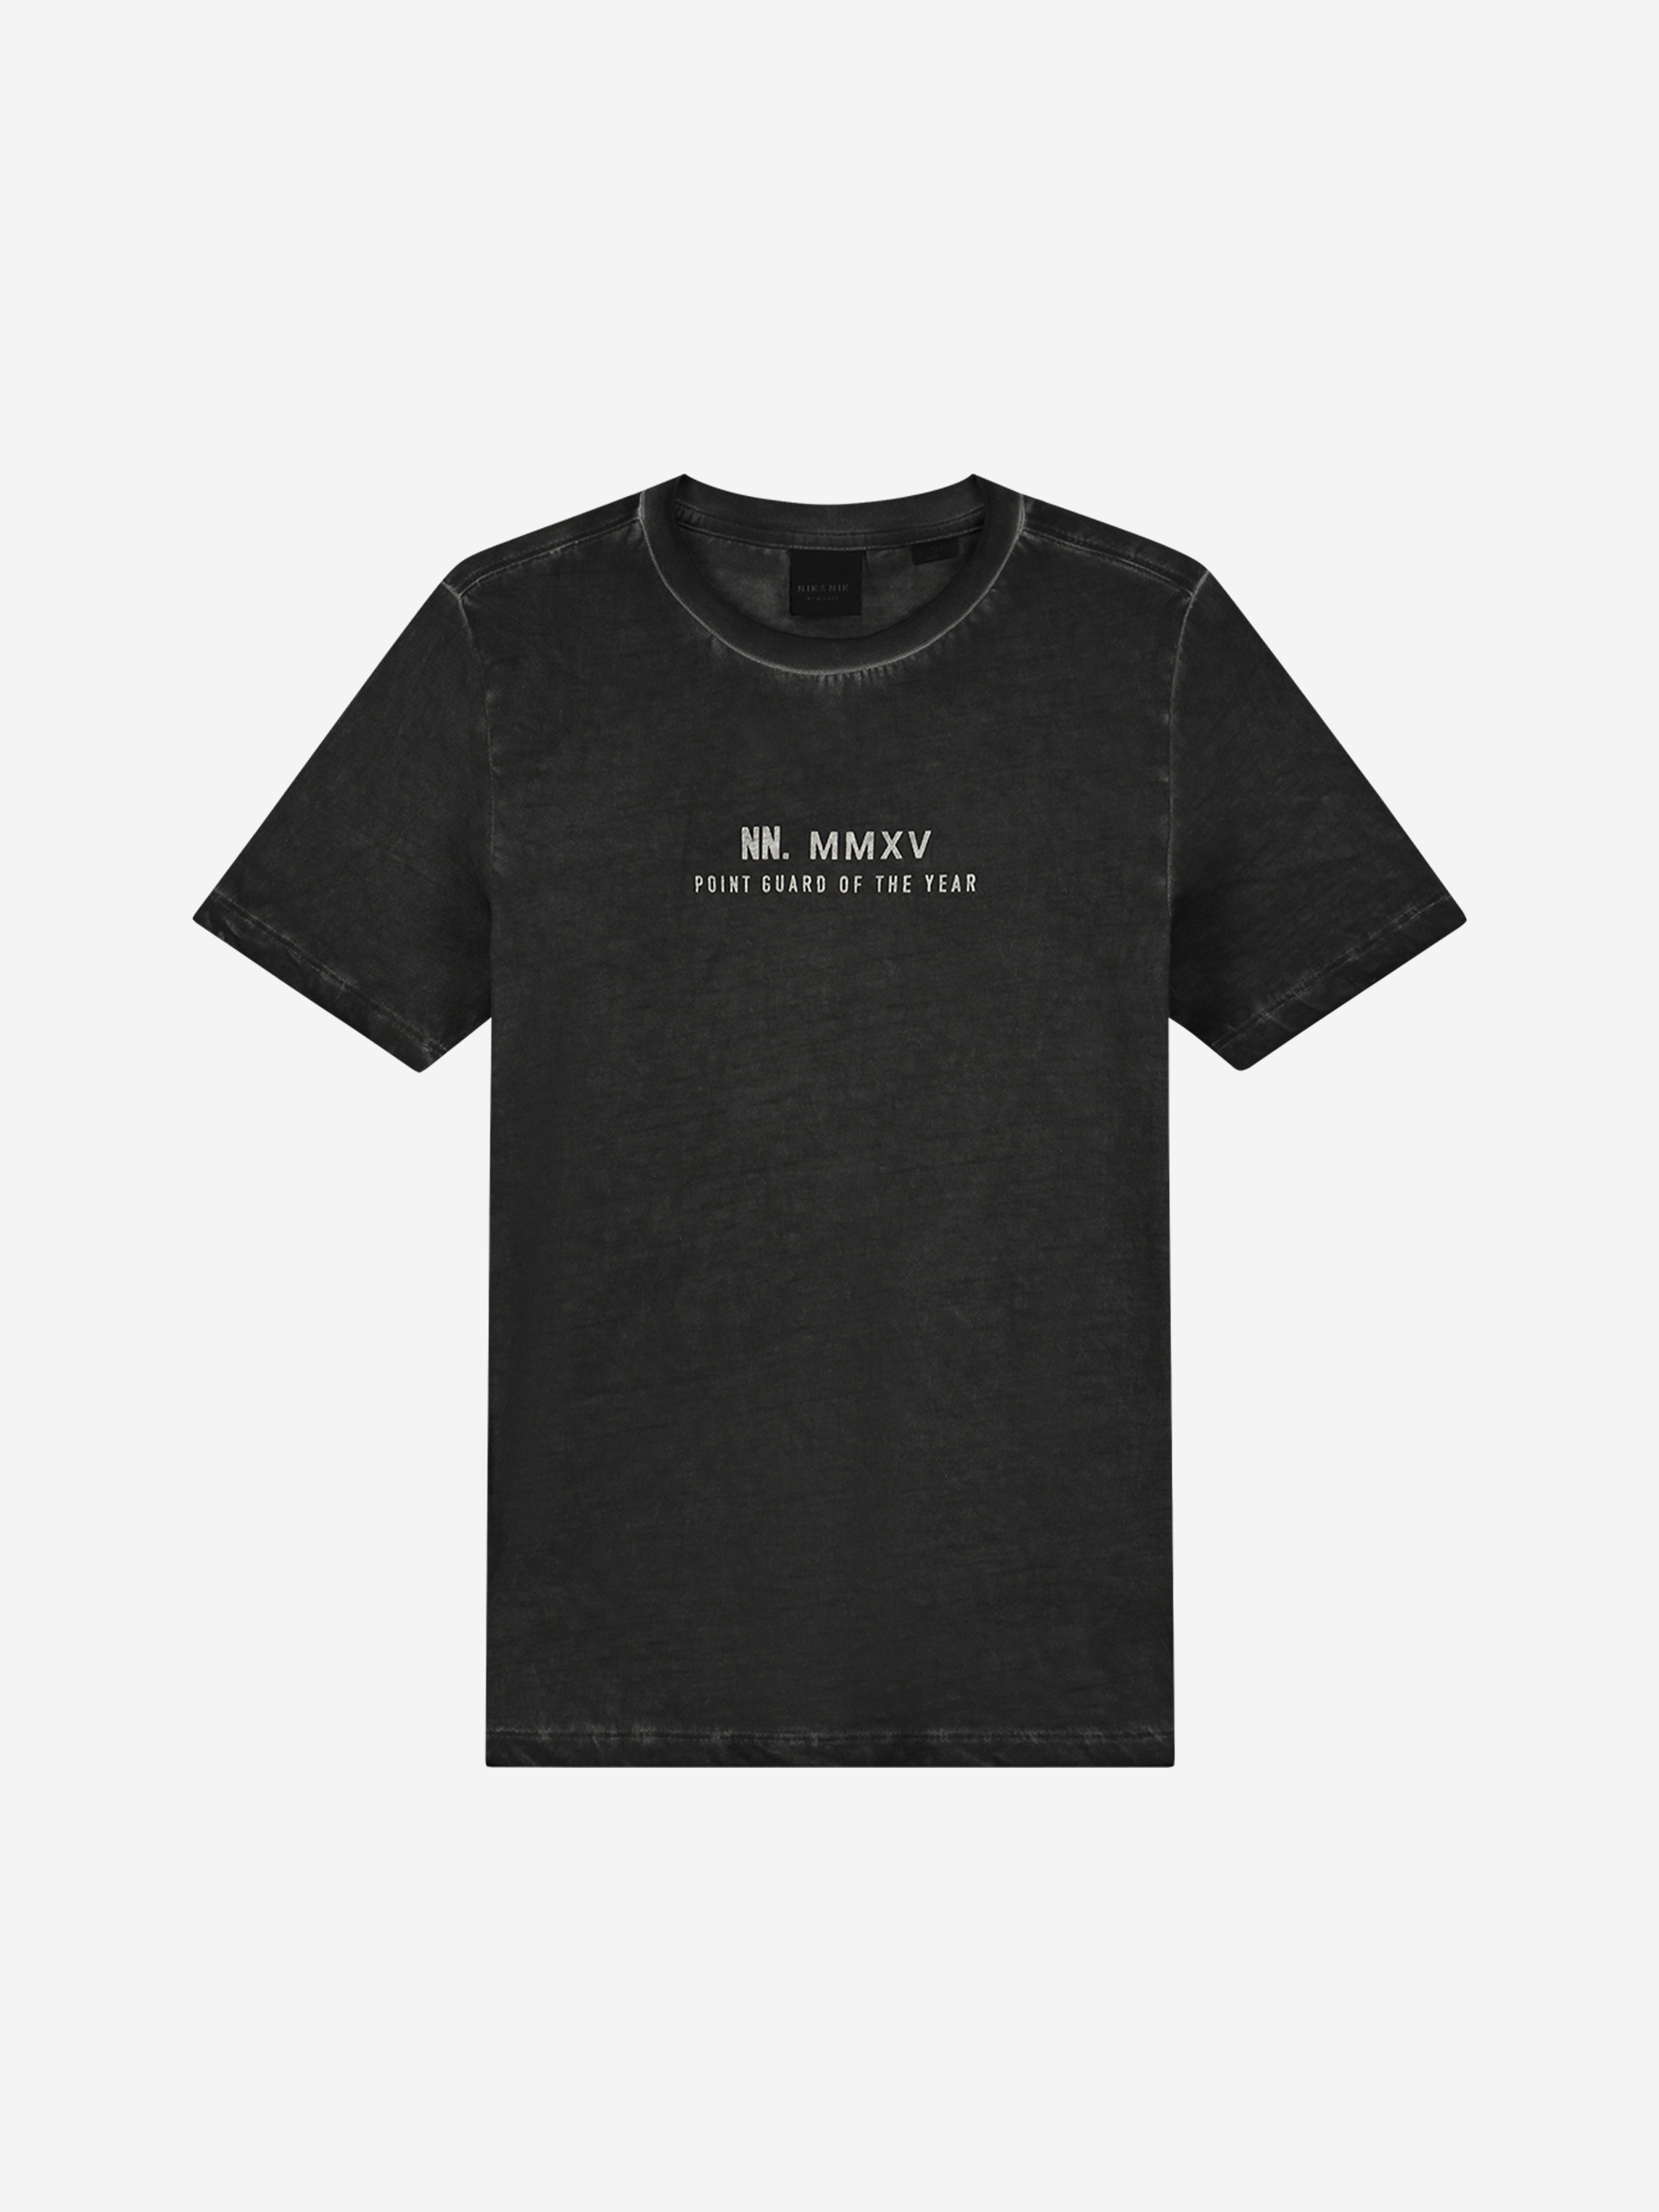 NN quote t-shirt with bleached effect